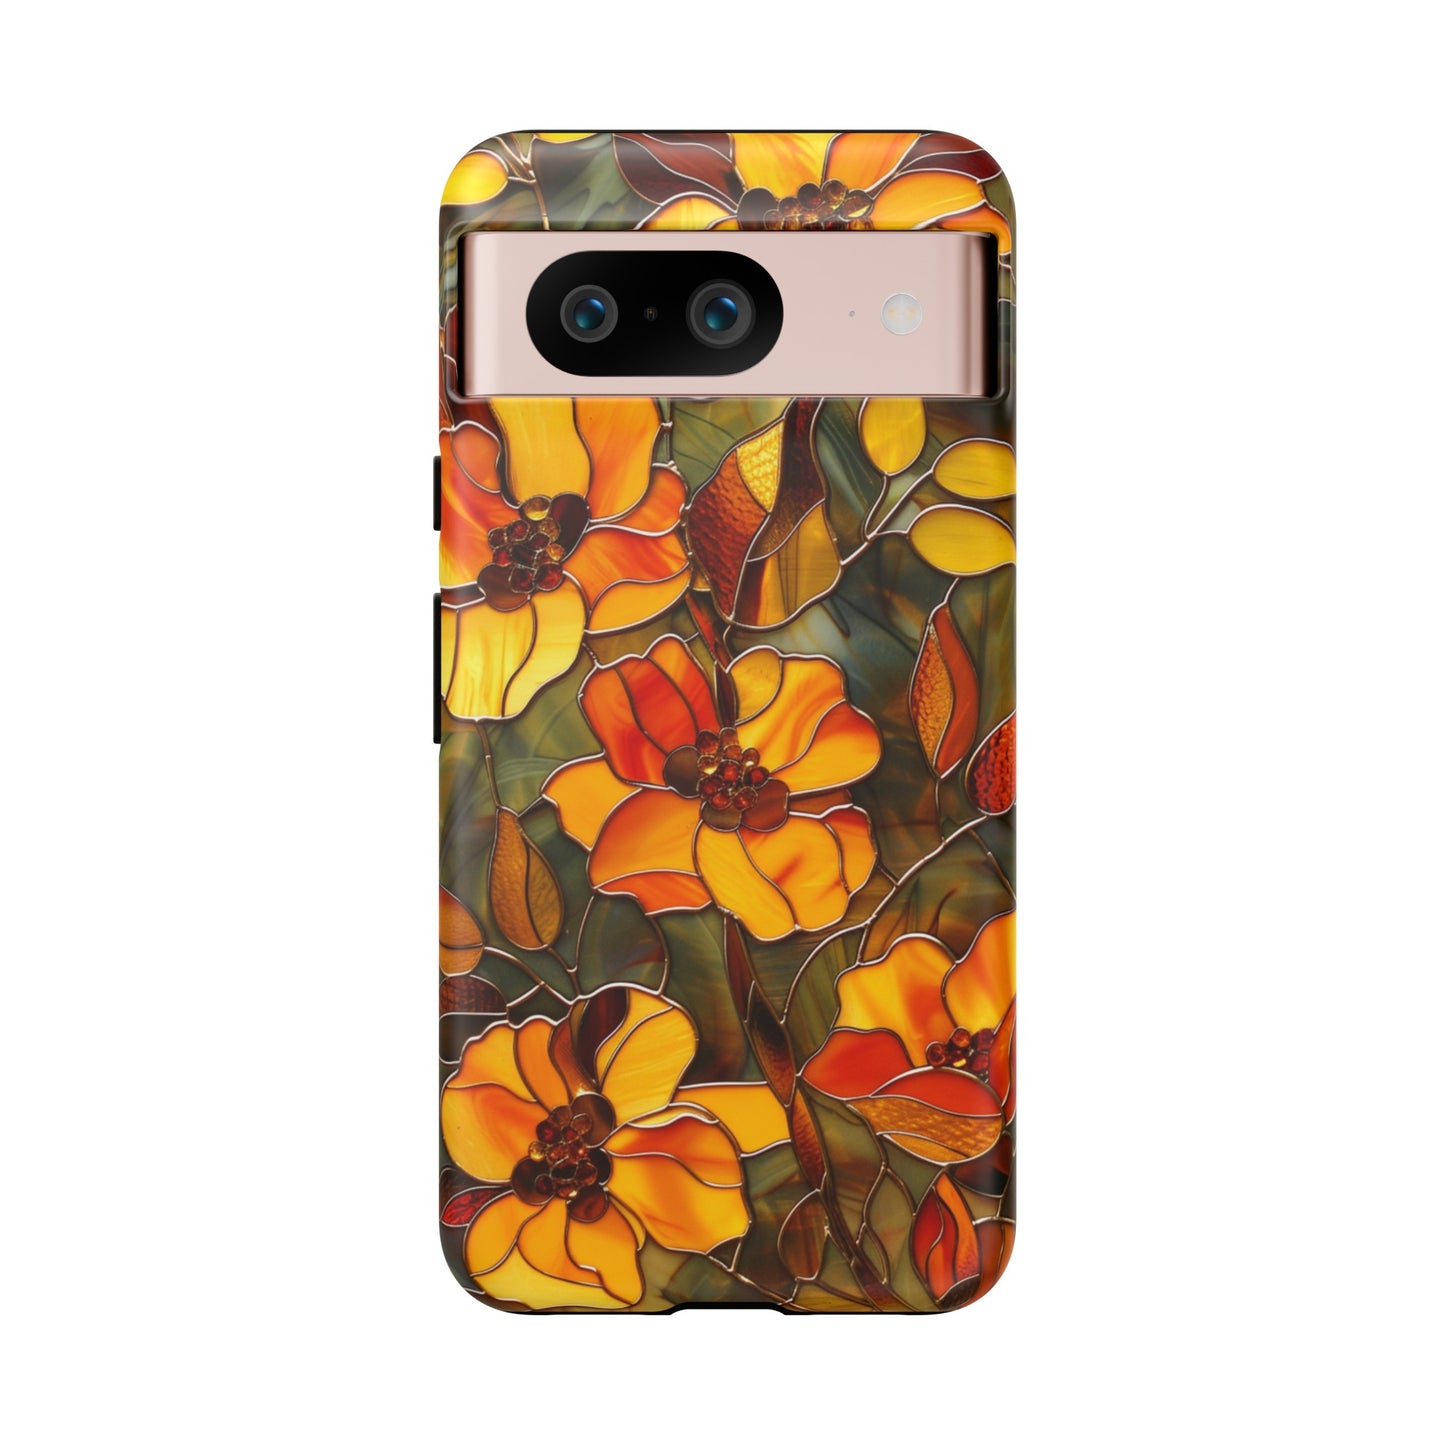 stained glass floral phone case for Google Pixel